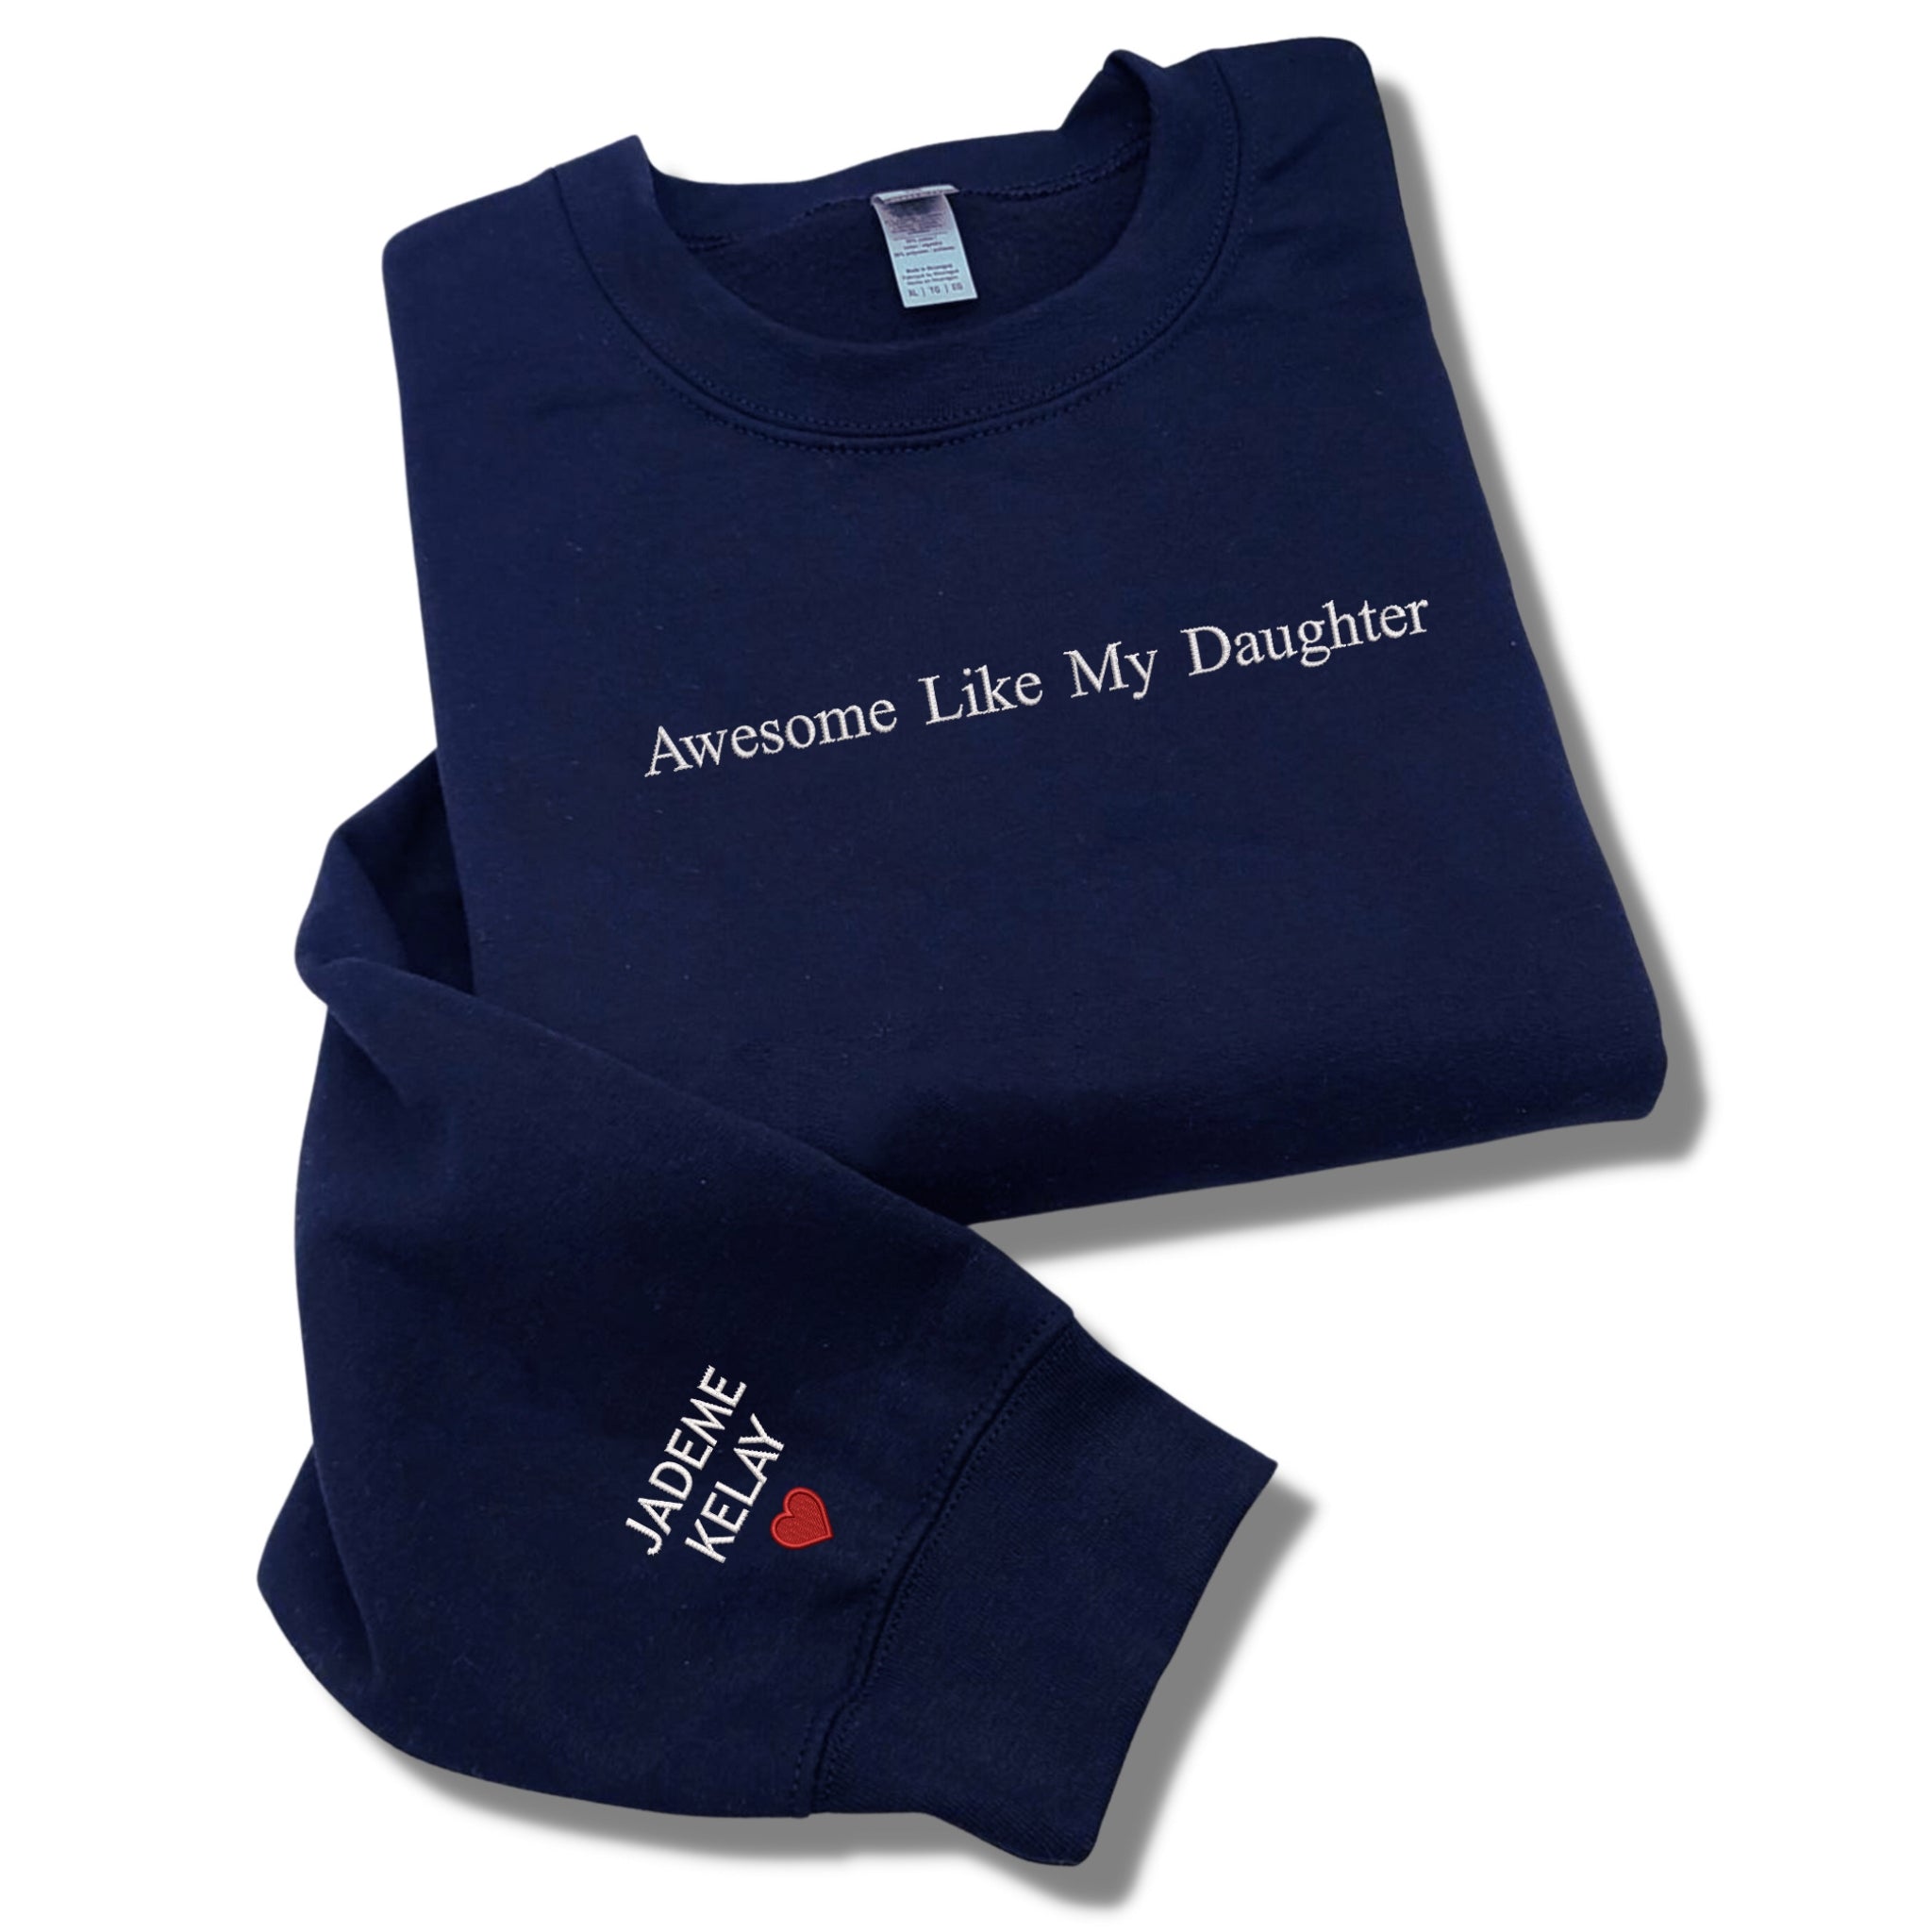 Awesome Like My Daughter Sweatshirt Embroidered